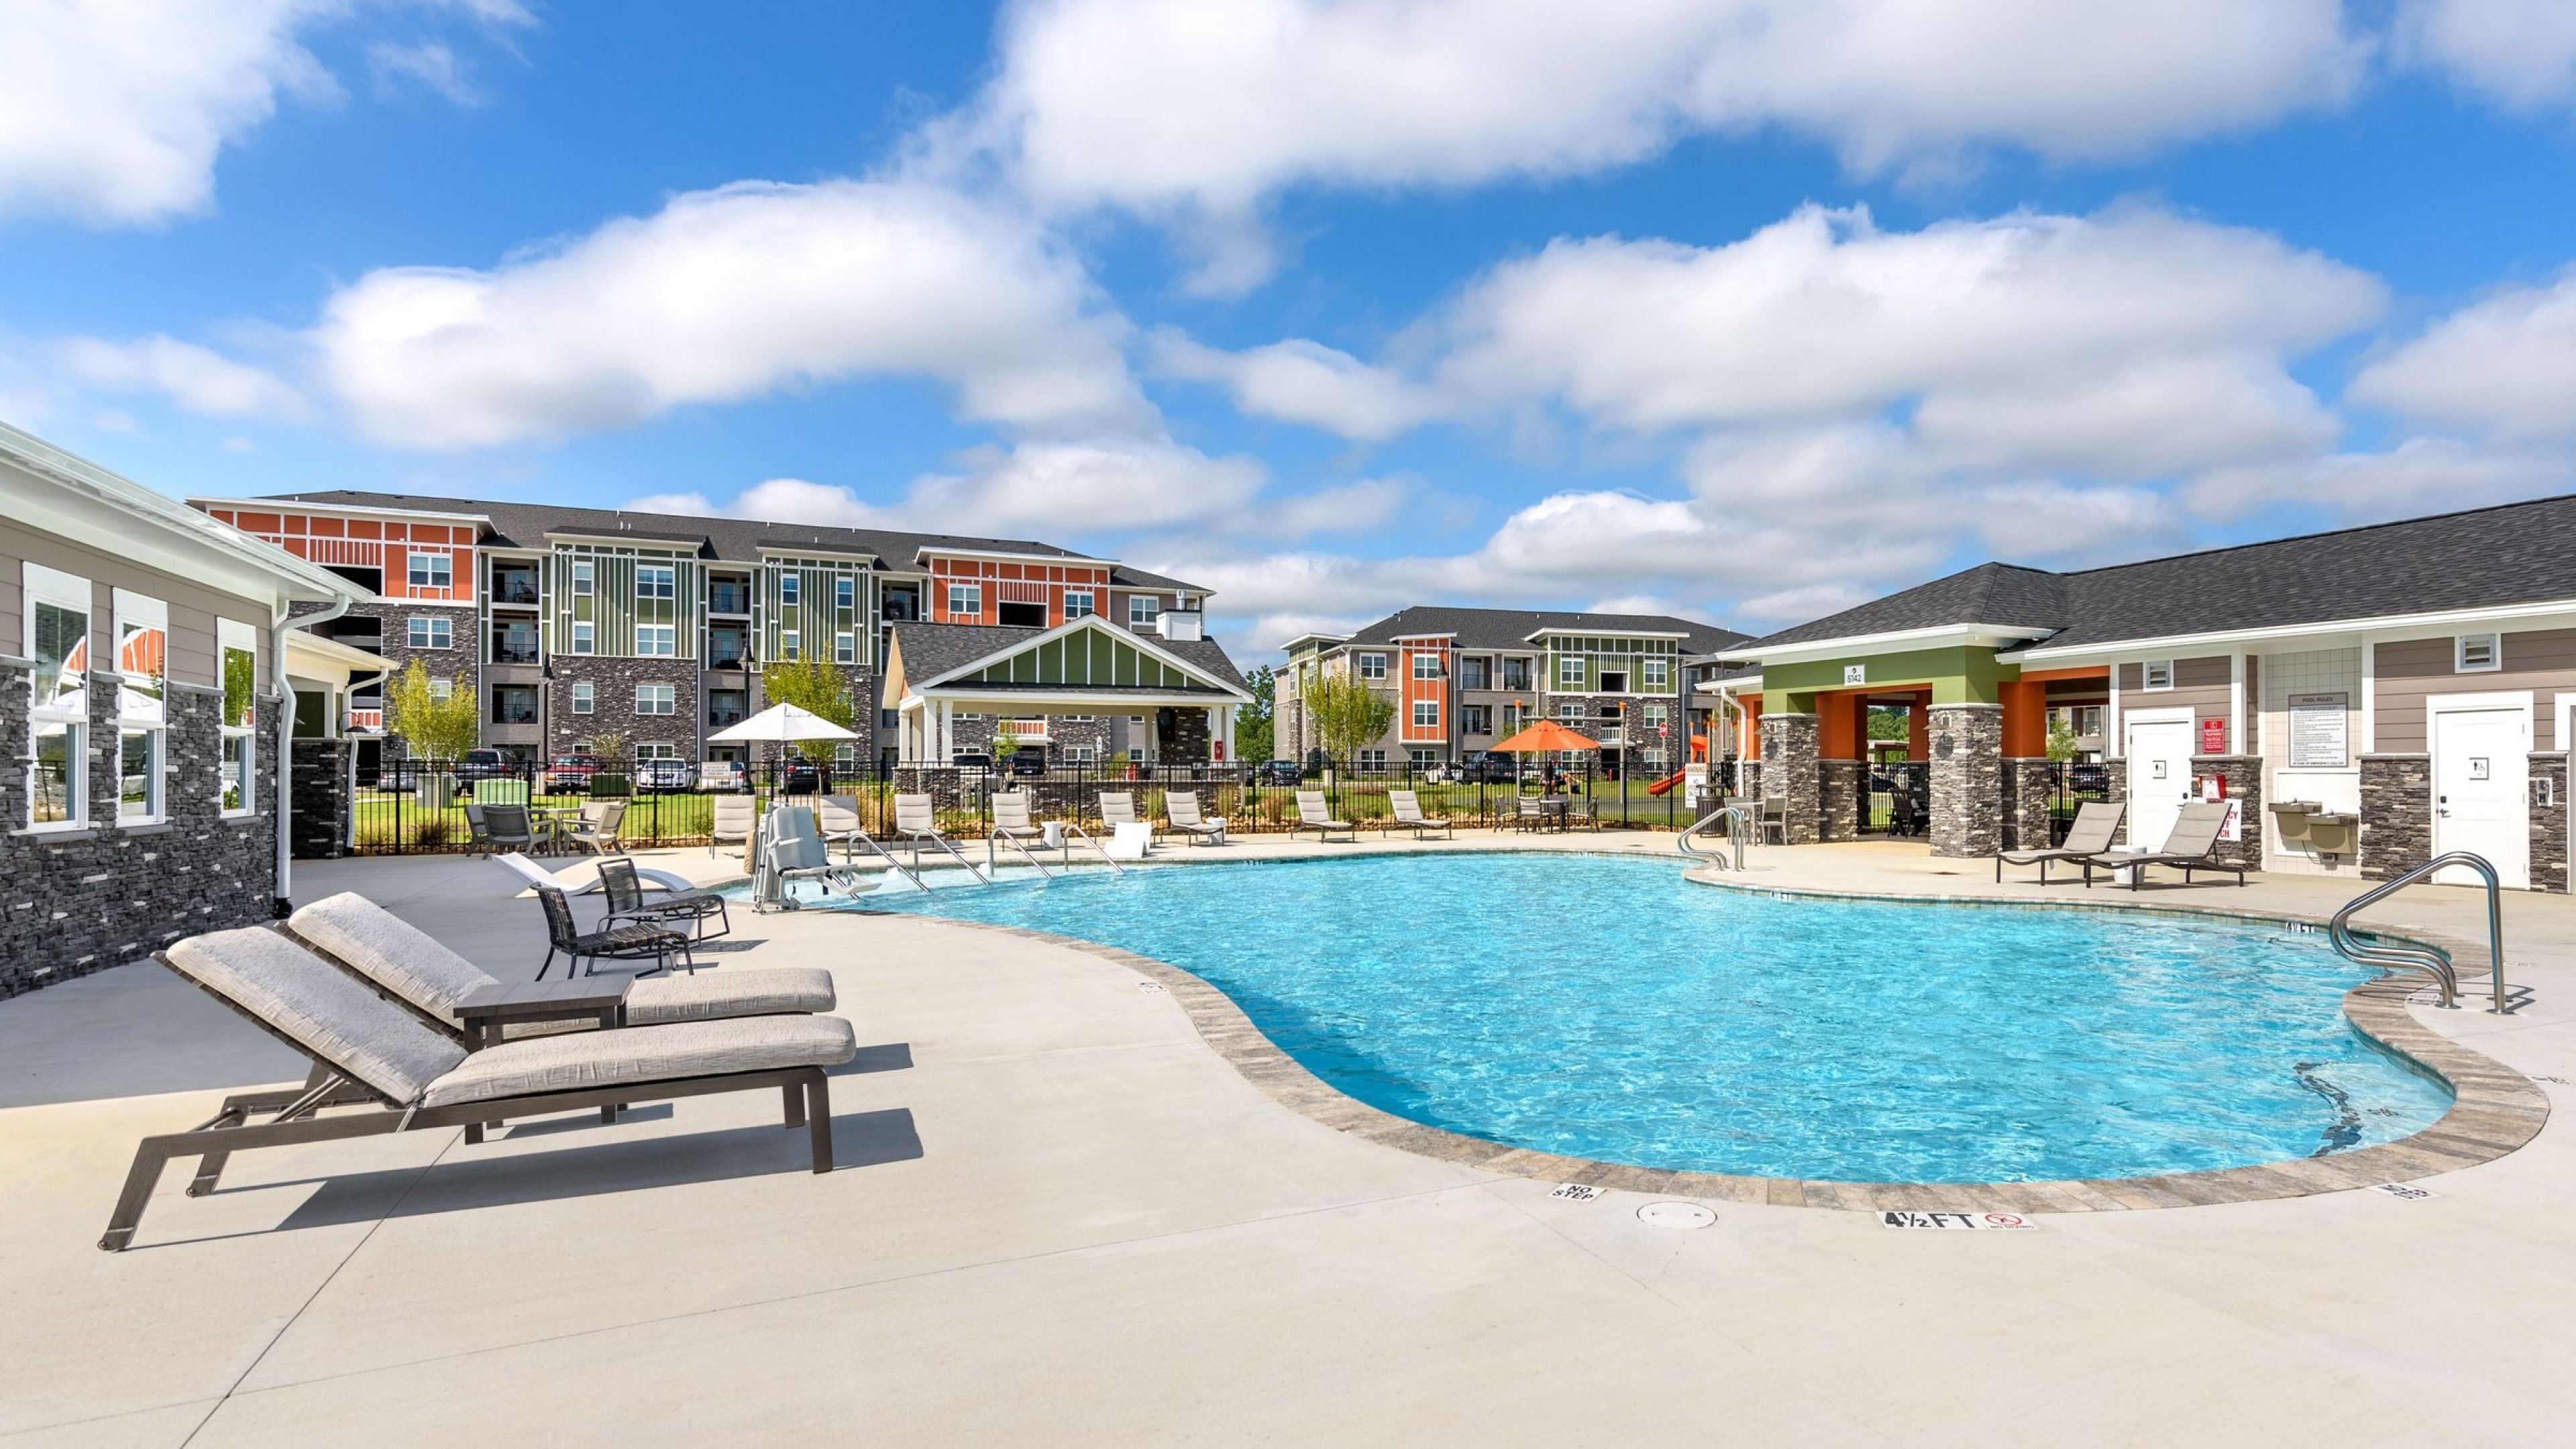 Hawthorne at the Crest outdoor luxury pool amenity for residents, surrounded by lounge chairs